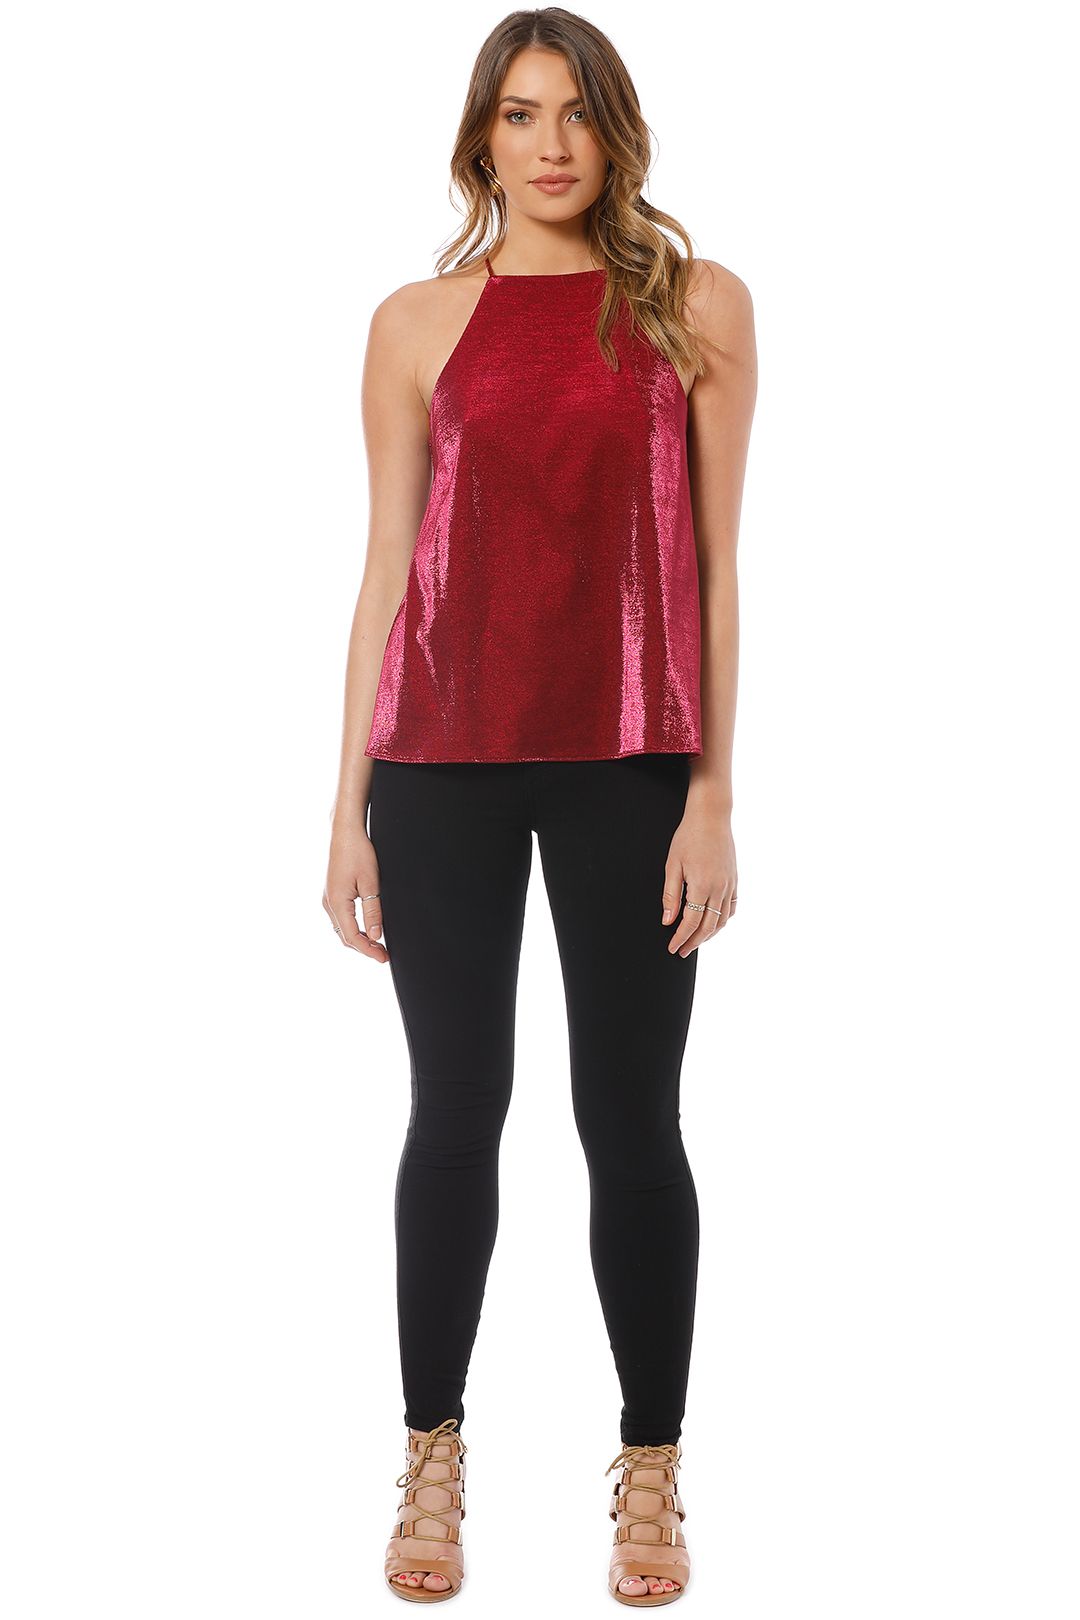 Camilla and Marc - Opasidy Top - Red - Front